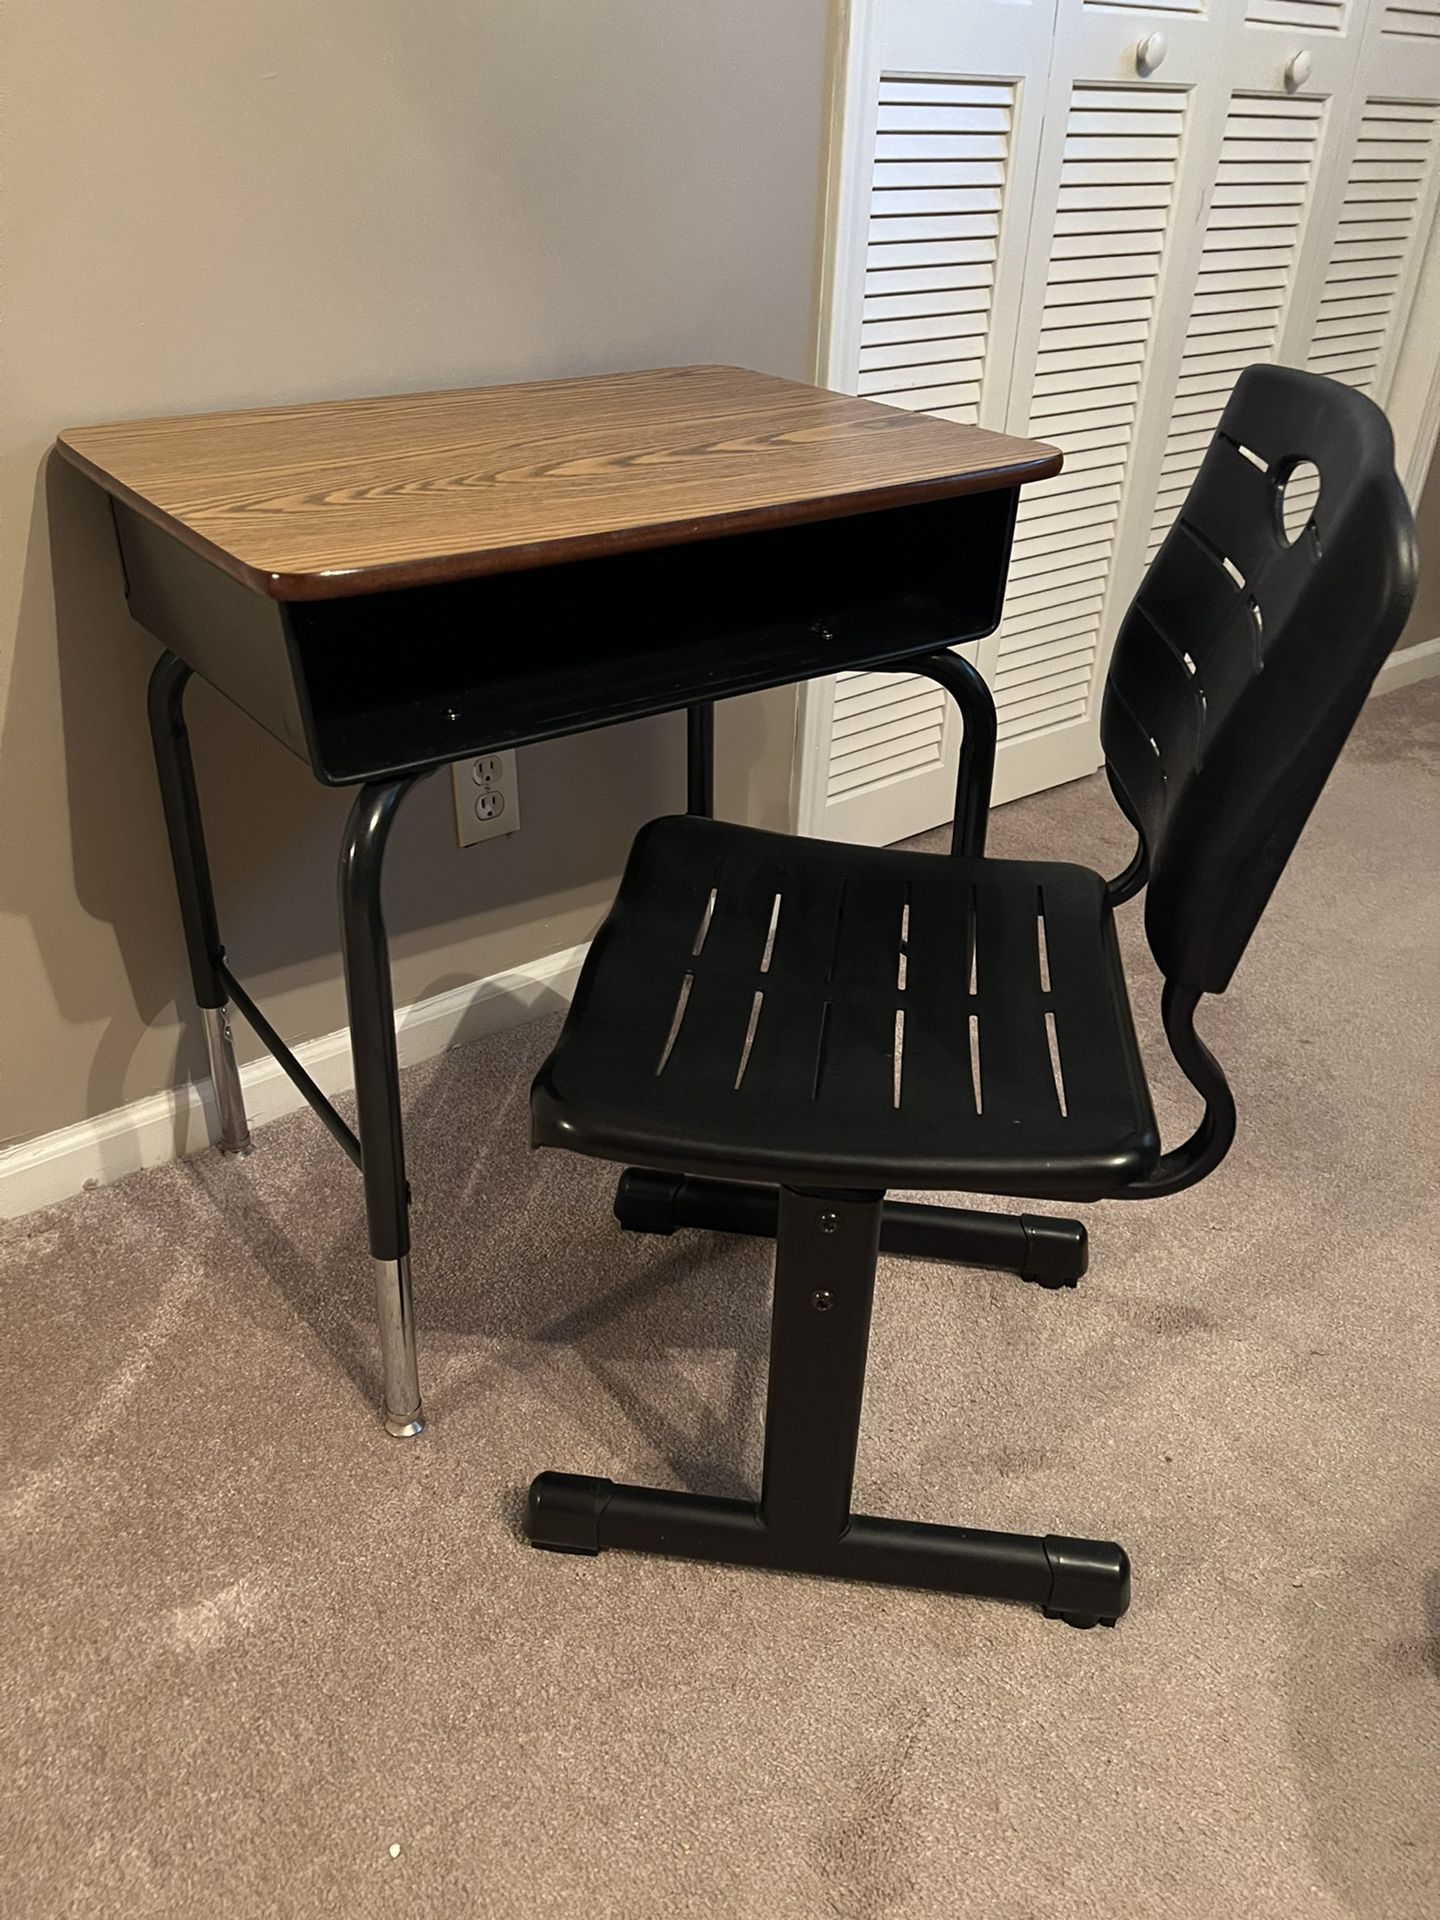 Student desk and Chair